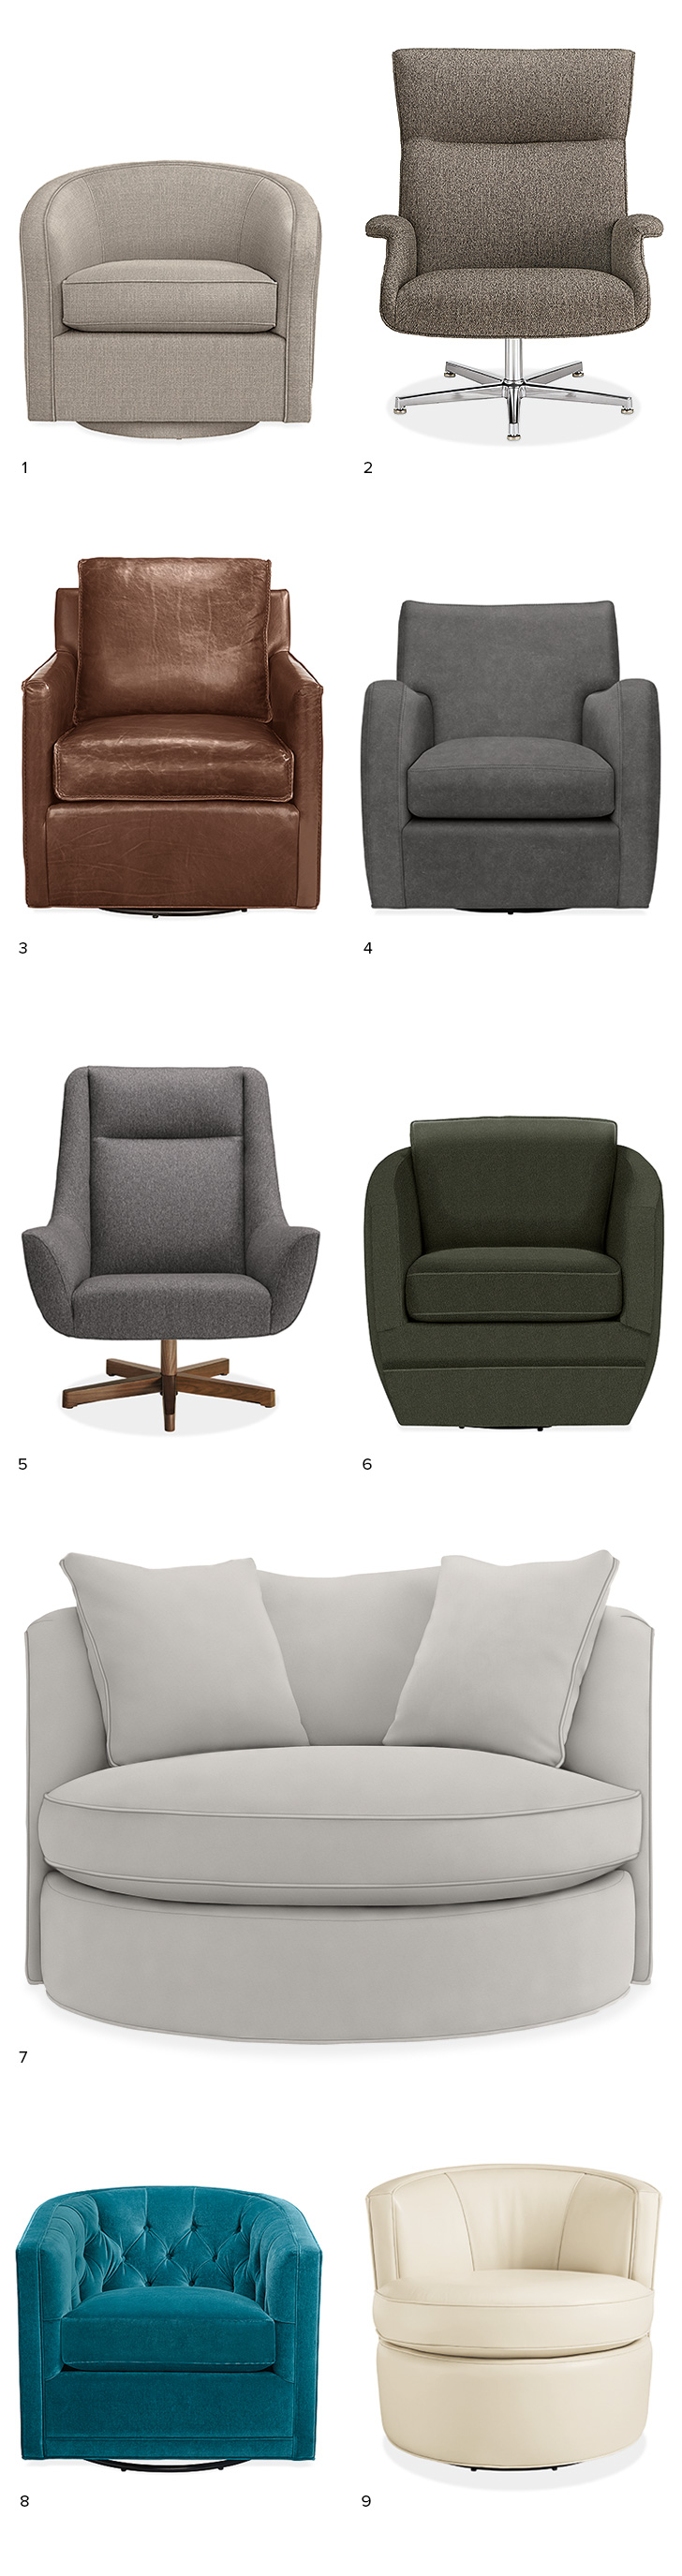 Modern swivel chairs add comfort and function to your living room